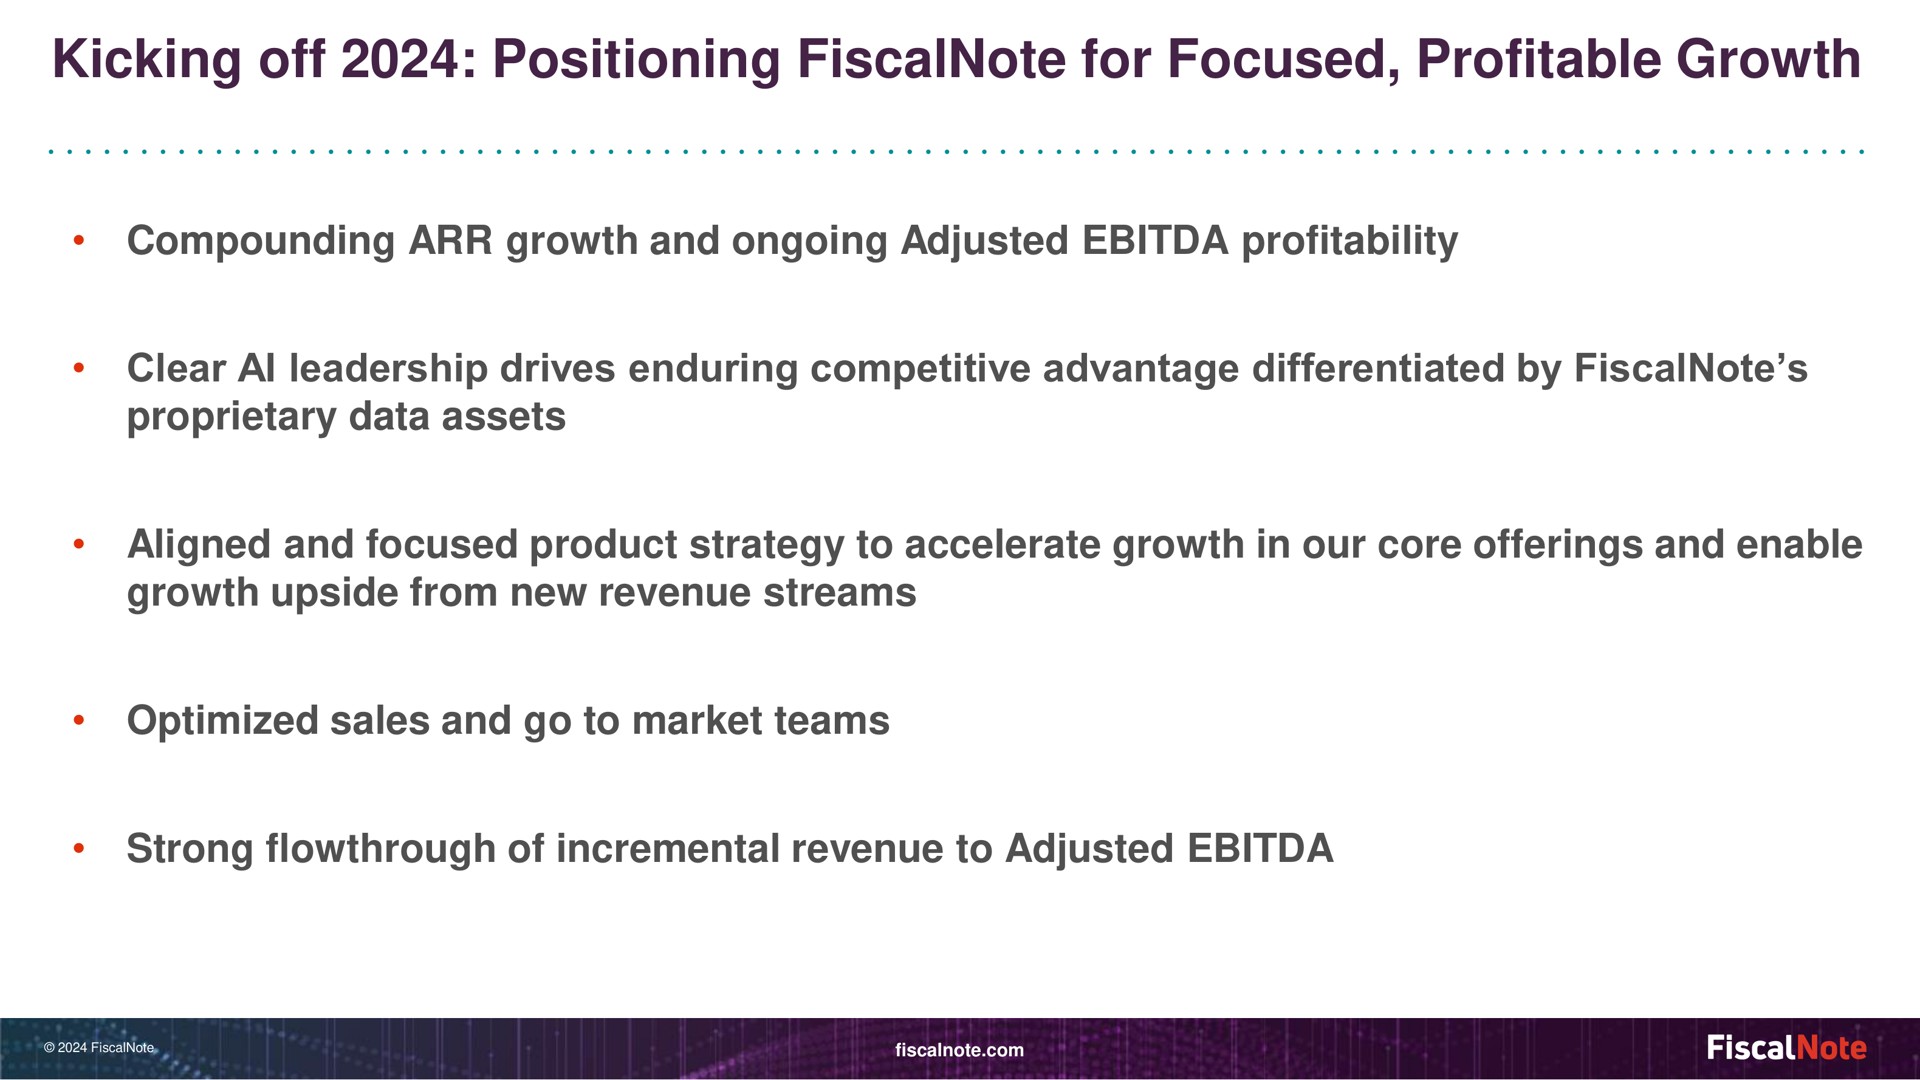 kicking off positioning for focused profitable growth compounding growth and ongoing adjusted profitability clear leadership drives enduring competitive advantage differentiated by proprietary data assets aligned and focused product strategy to accelerate growth in our core offerings and enable growth upside from new revenue streams optimized sales and go to market teams strong of incremental revenue to adjusted | FiscalNote